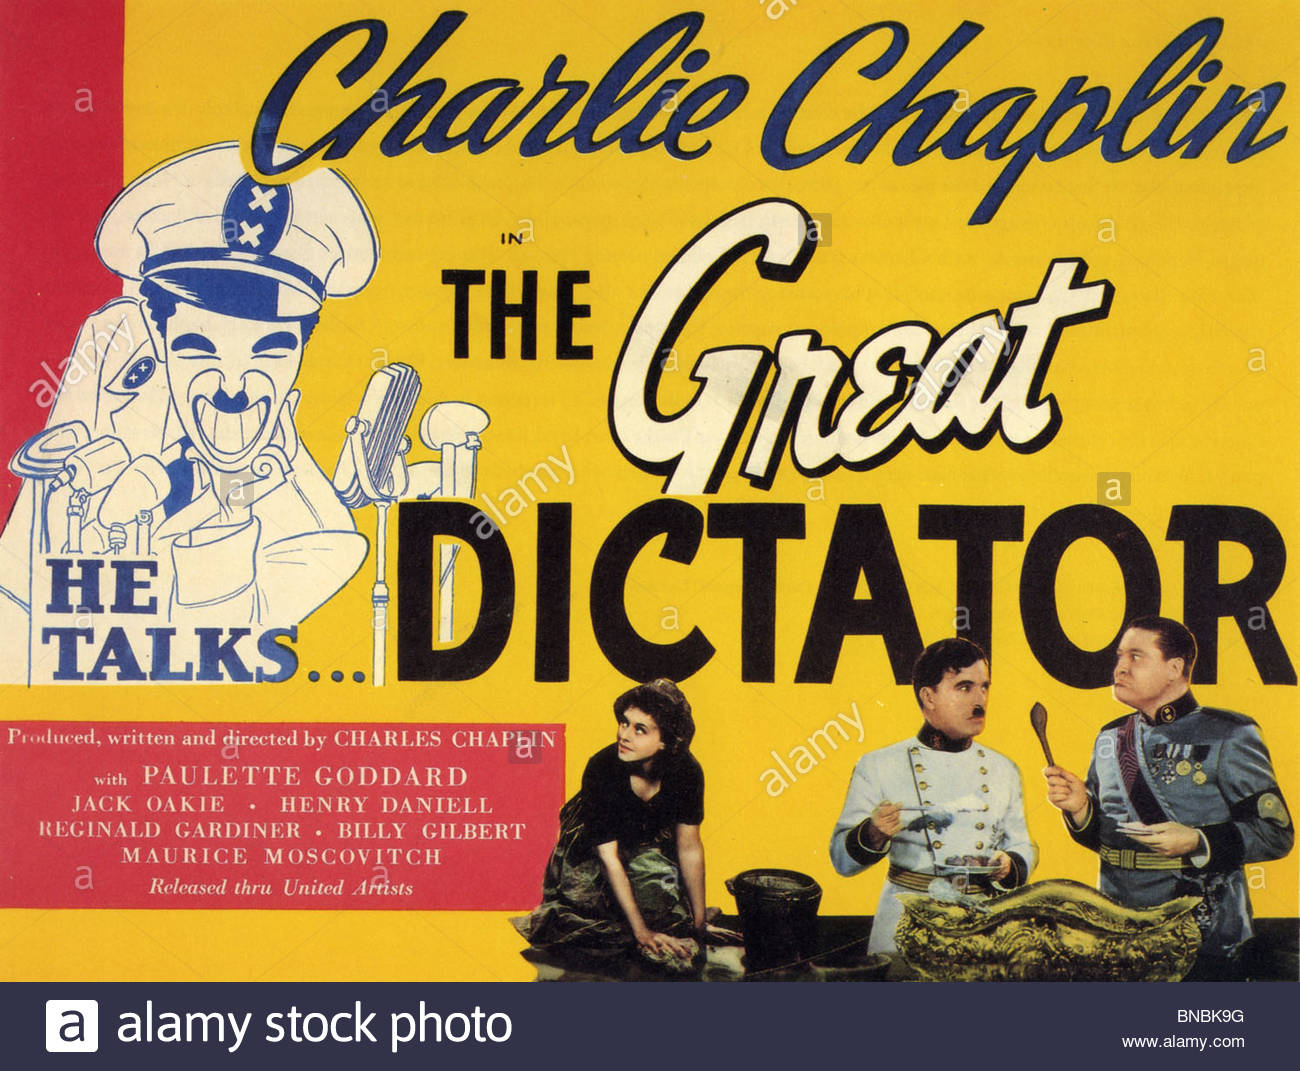 The Great Dictator #7